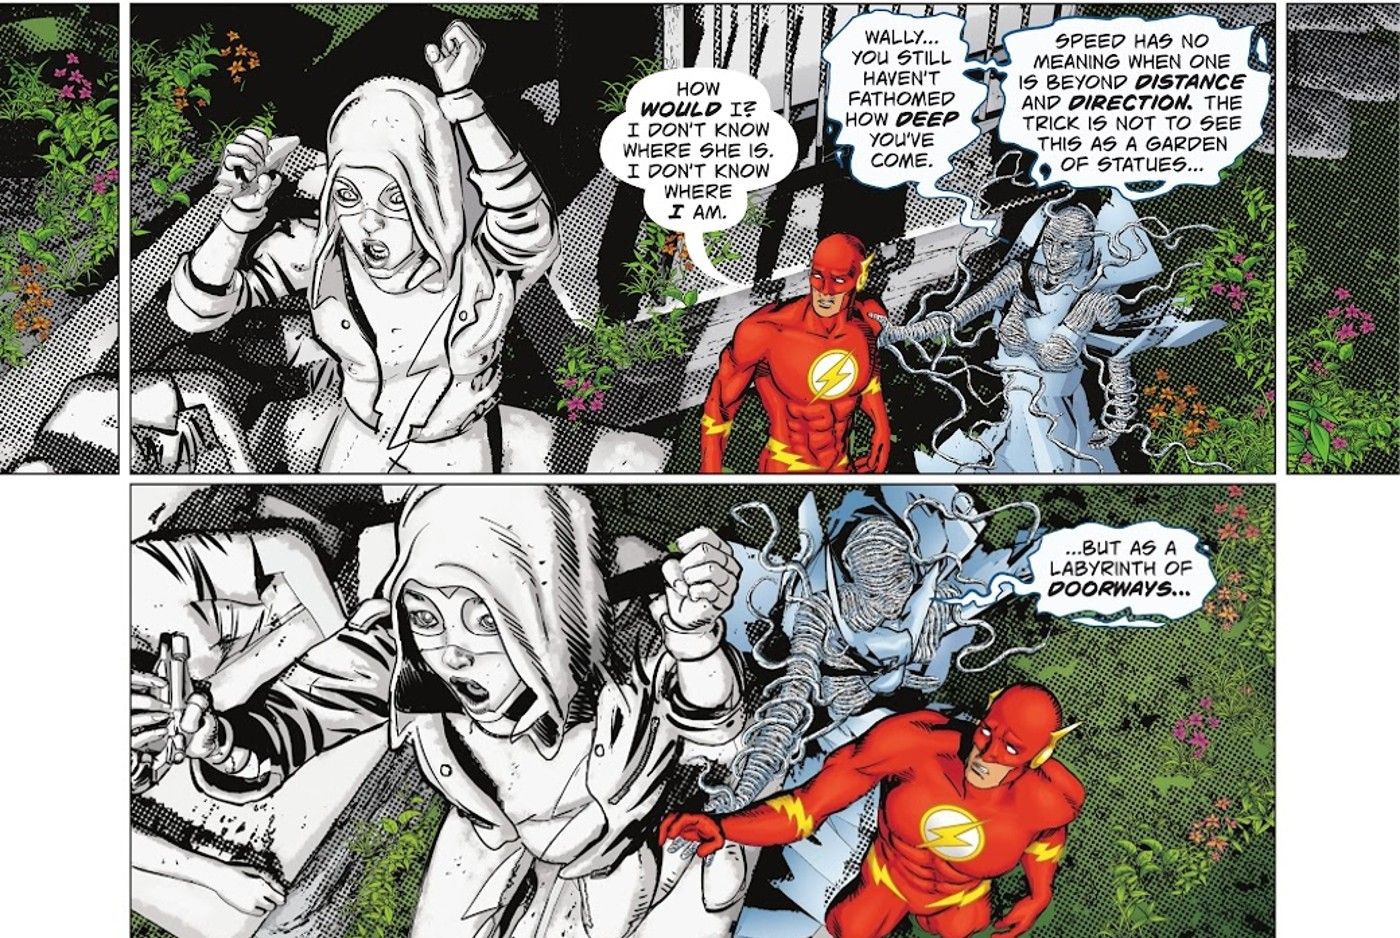 “A Labyrinth of Doorways”: Flash’s New Teleportation Powers Have a Huge Advantage Over His Speed